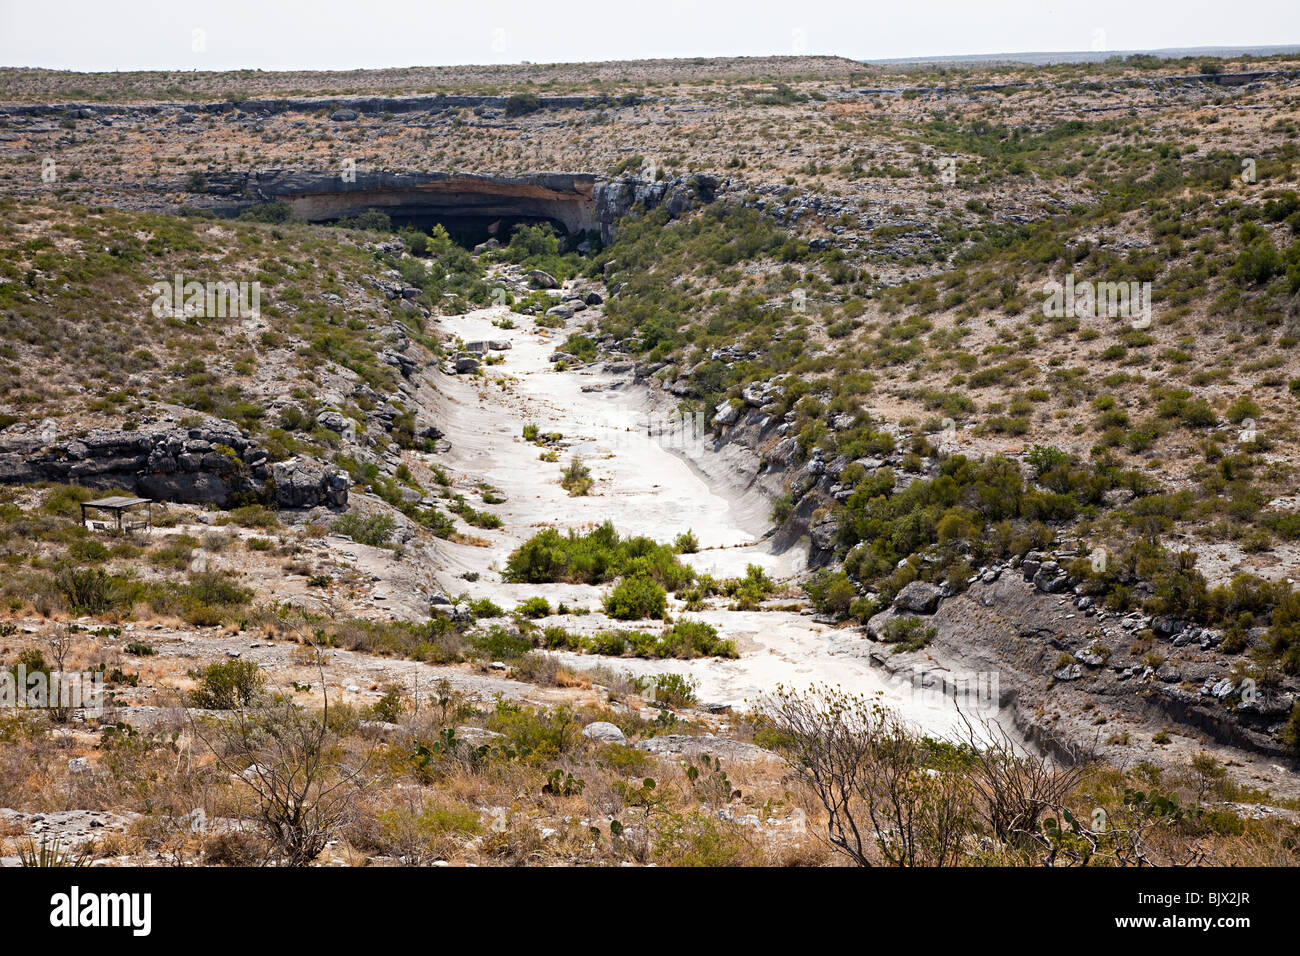 Seminole Canyon dry river bed and rock shelter Texas USA Stock Photo